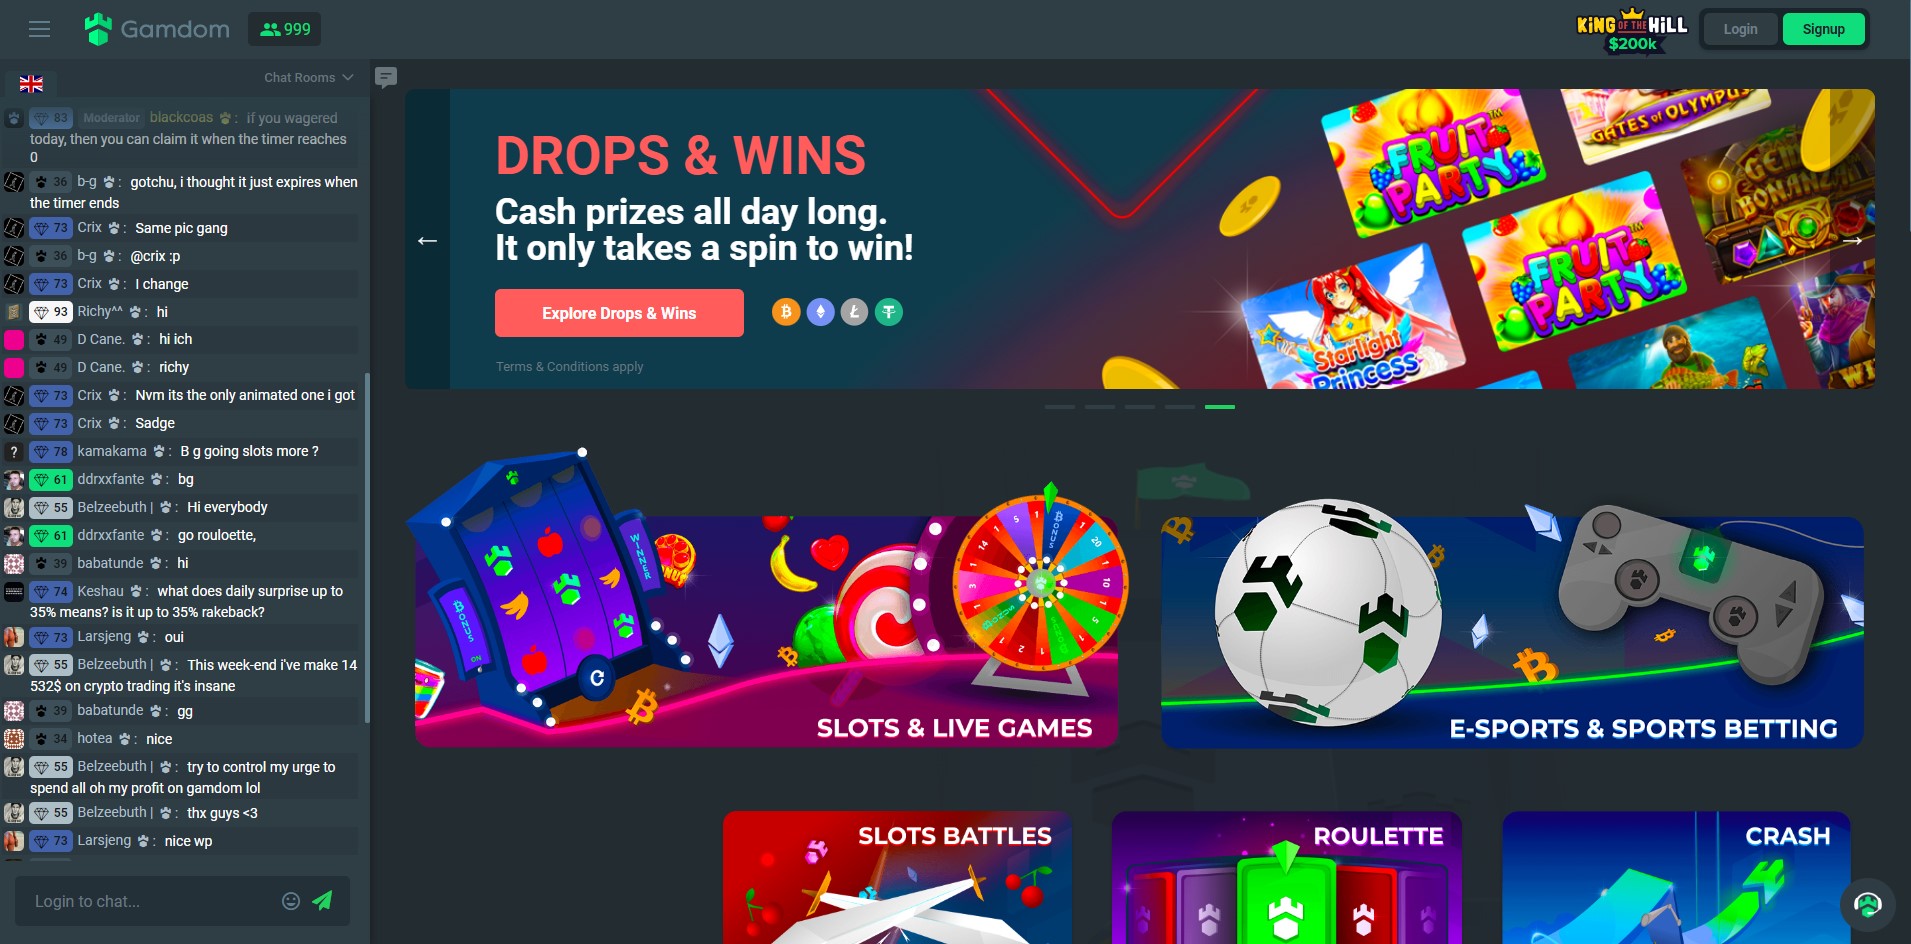 Gamdom Roulette Sites